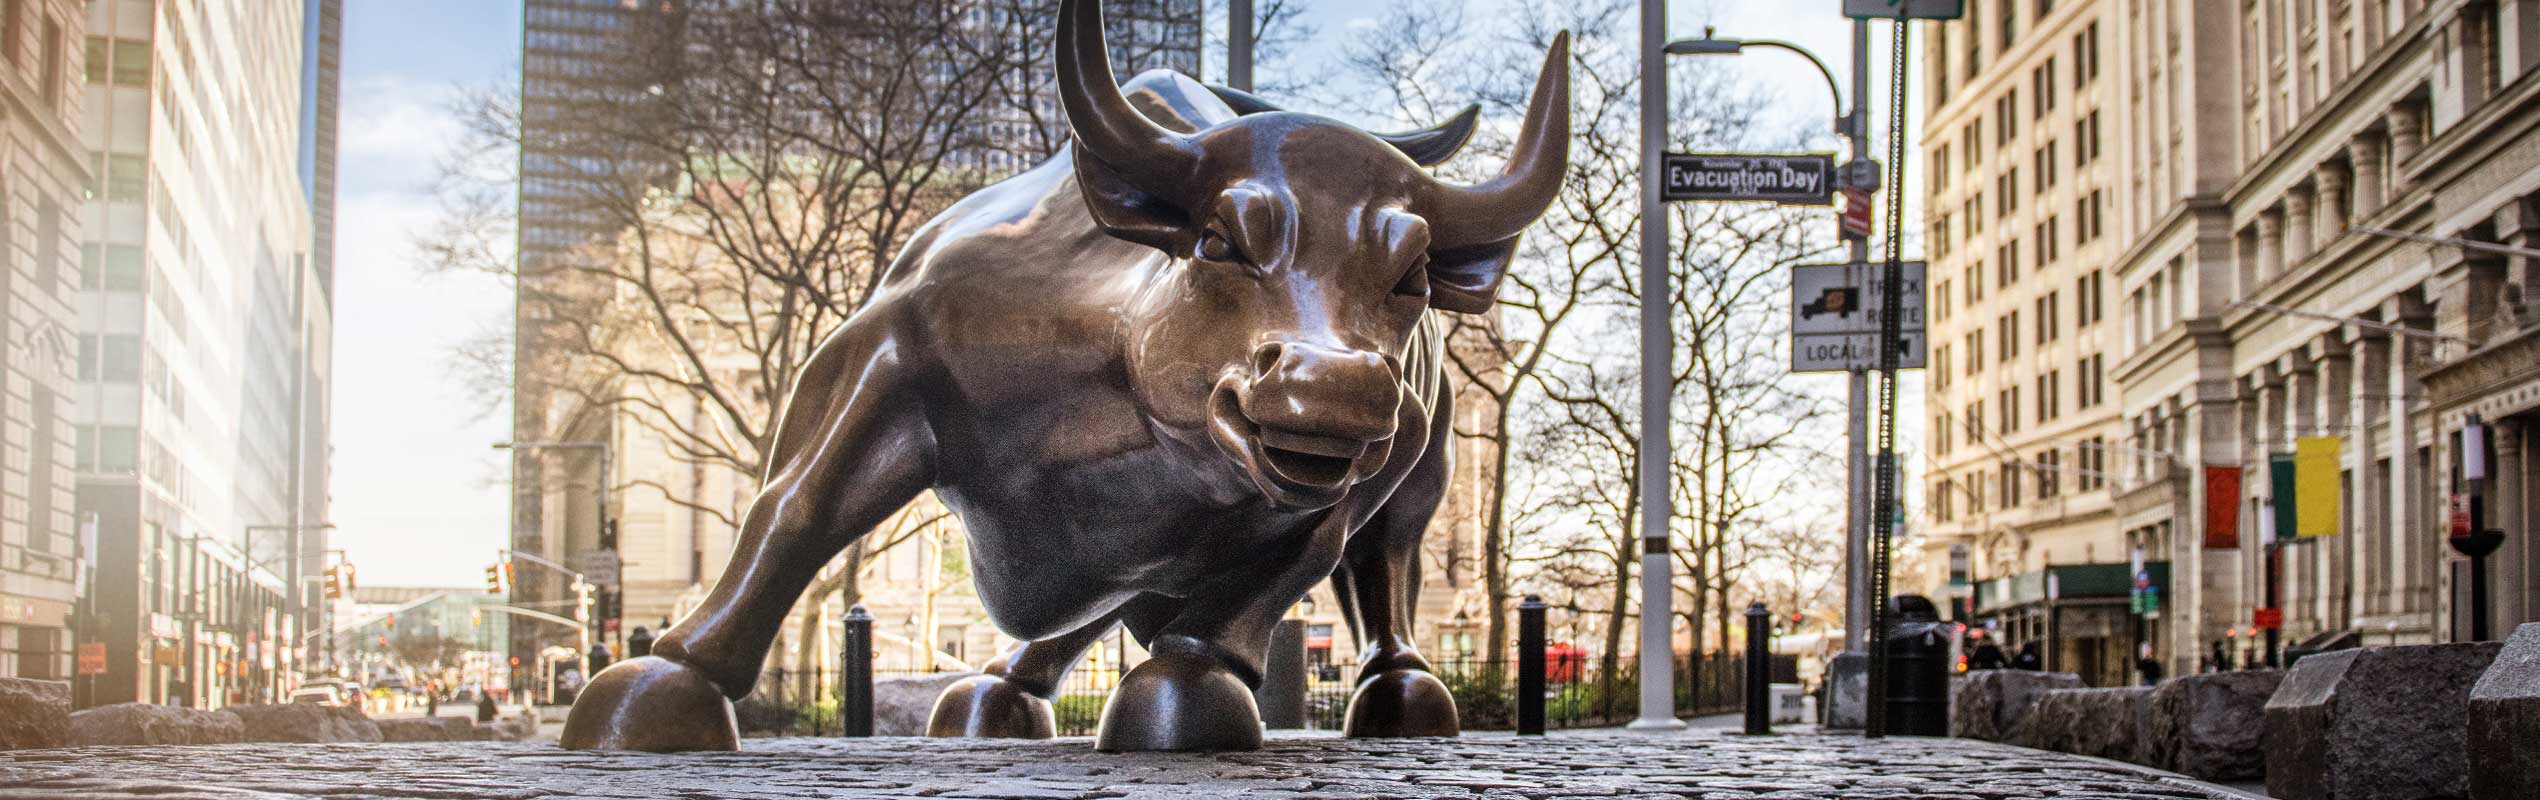 Charging bull statue on Wall Street in New York City.